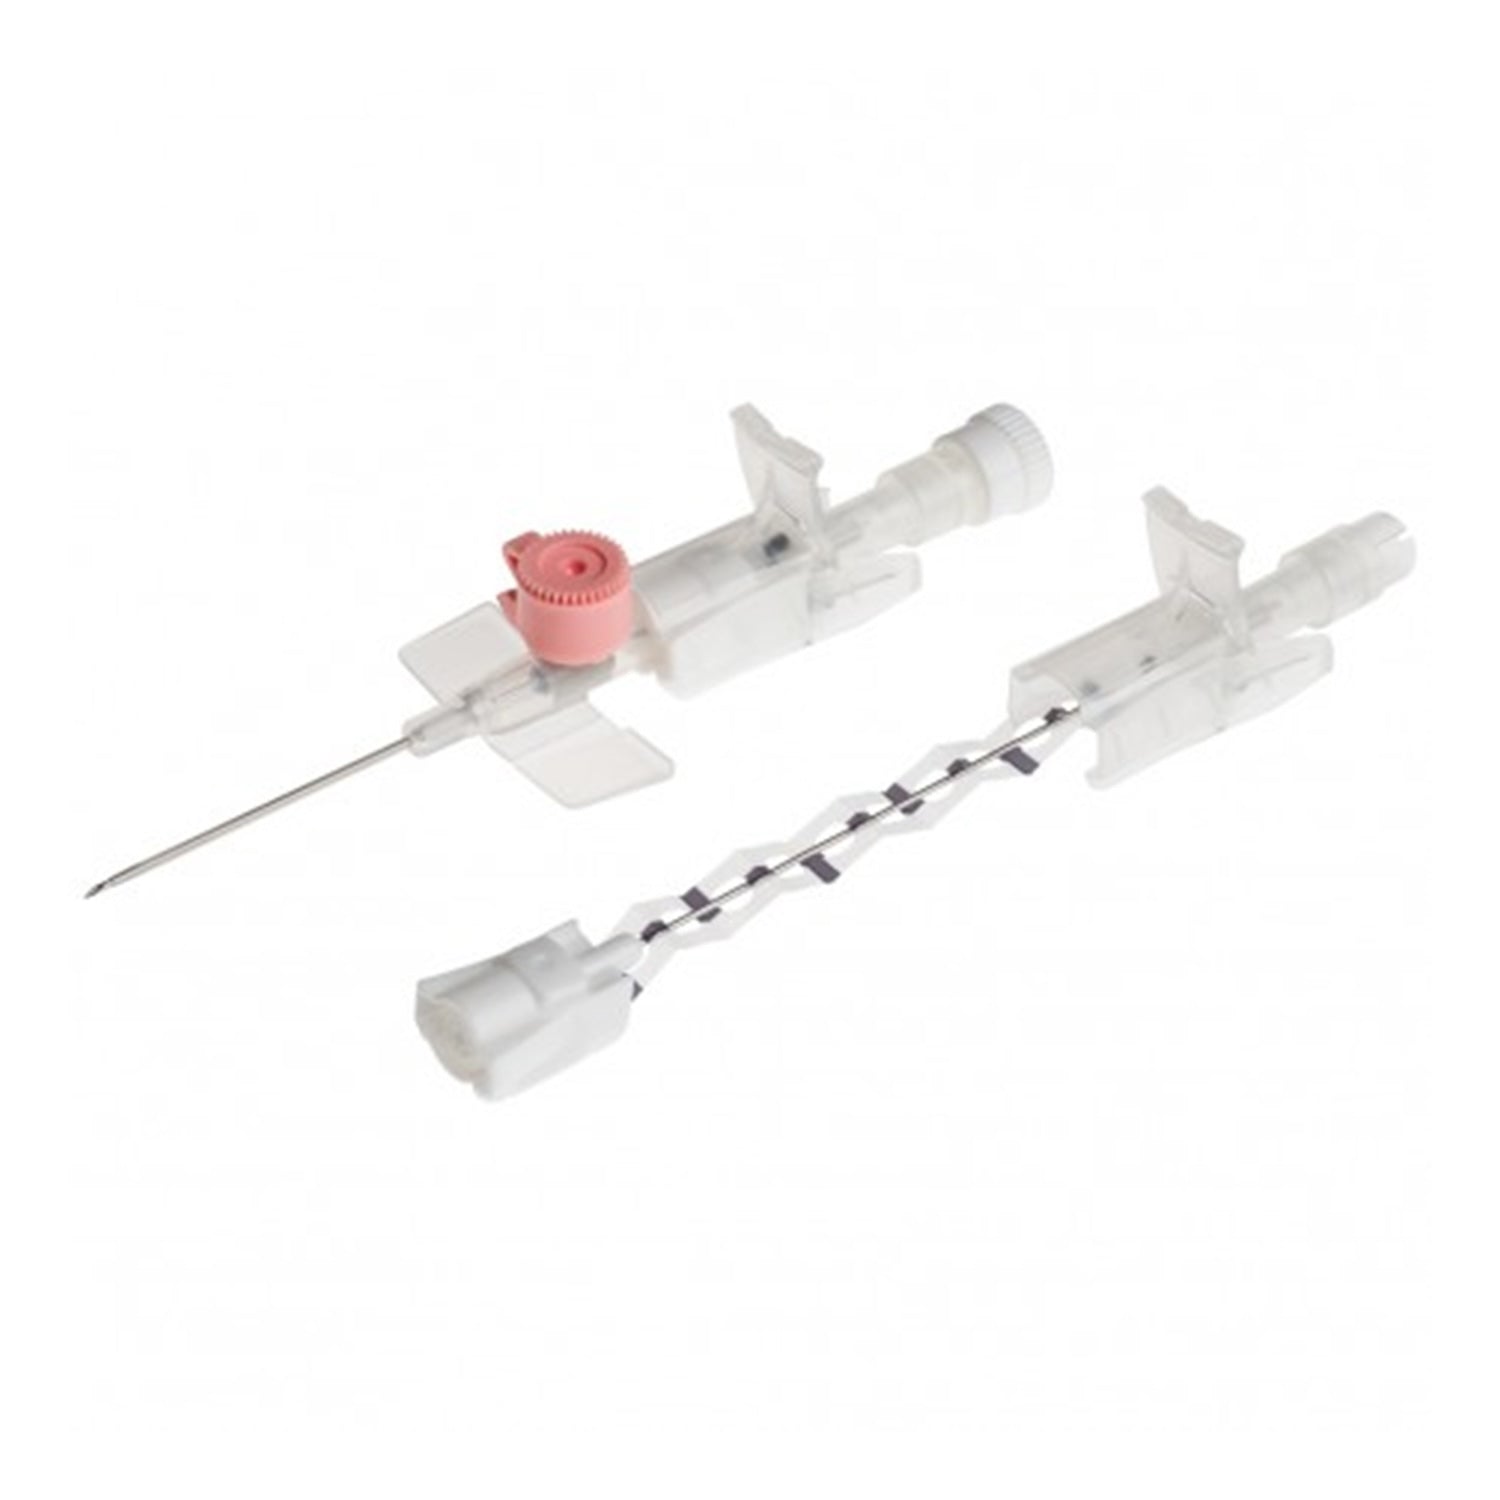 BD Venflon Pro Safety Peripheral IV Cannula with Injection Port | Pink | 20G x 32mm | Pack of 50 (2)